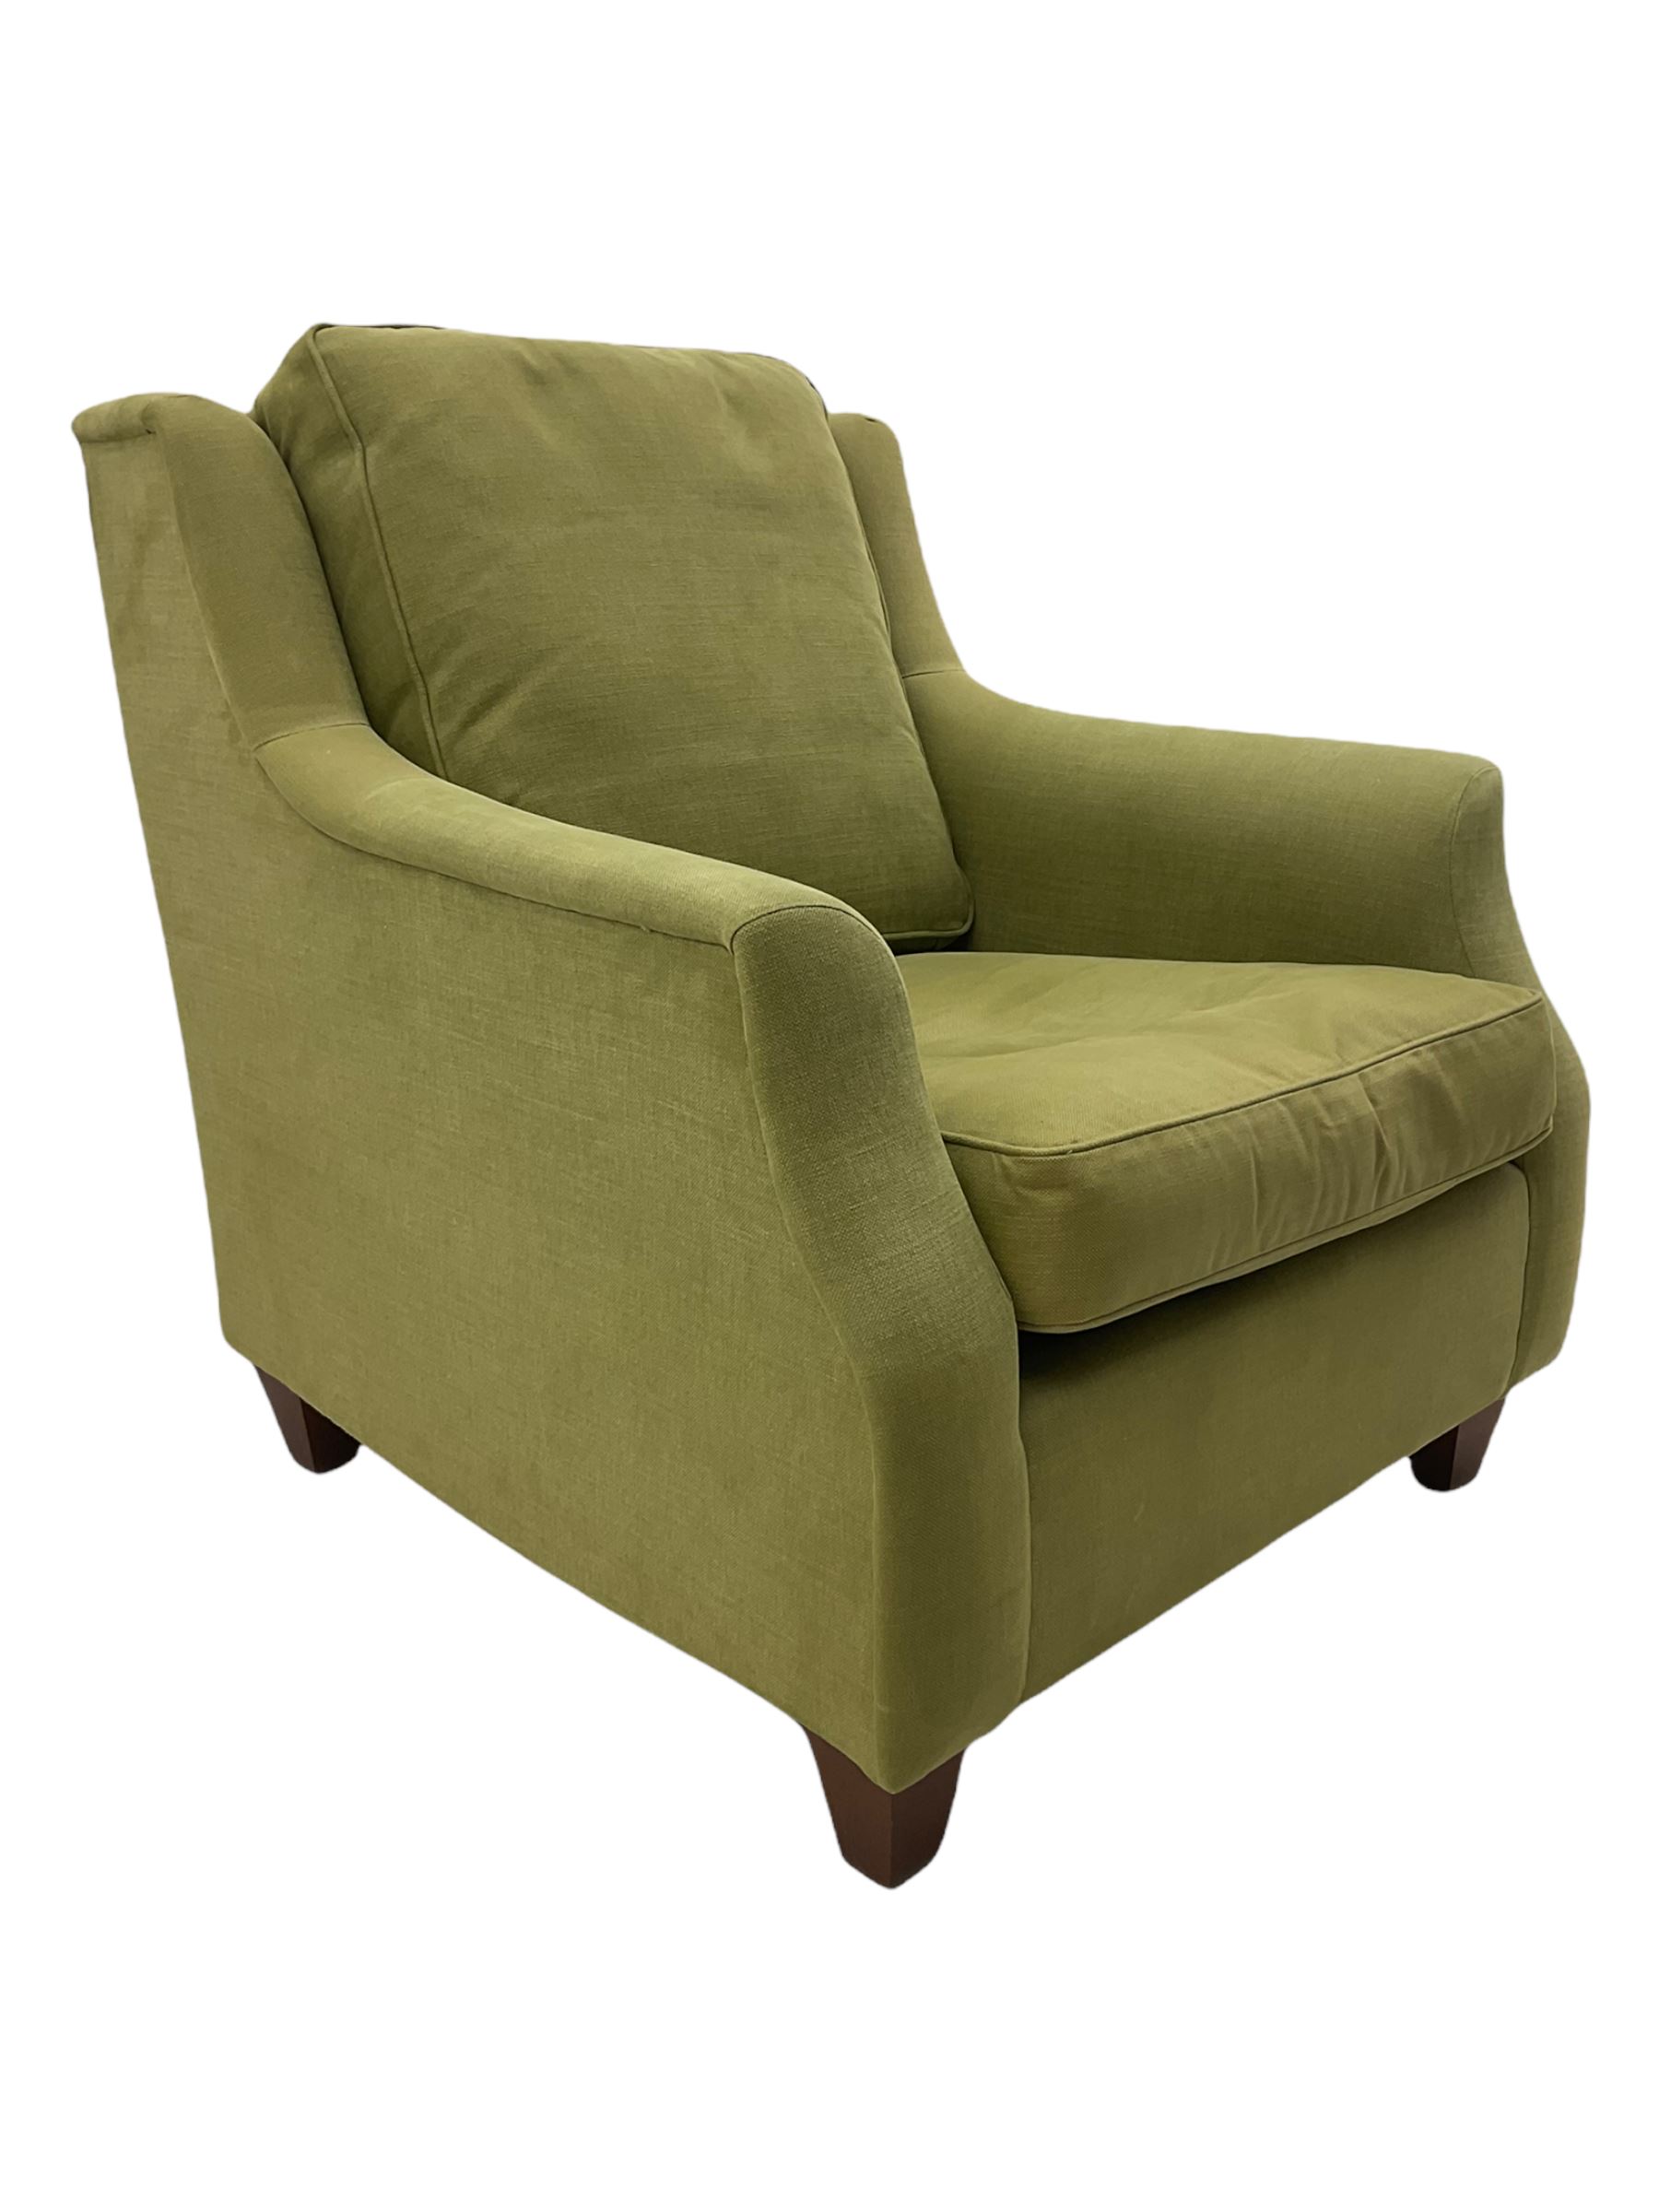 Wesley-Barrell two seat sofa and pair of matching armchairs - Image 18 of 20